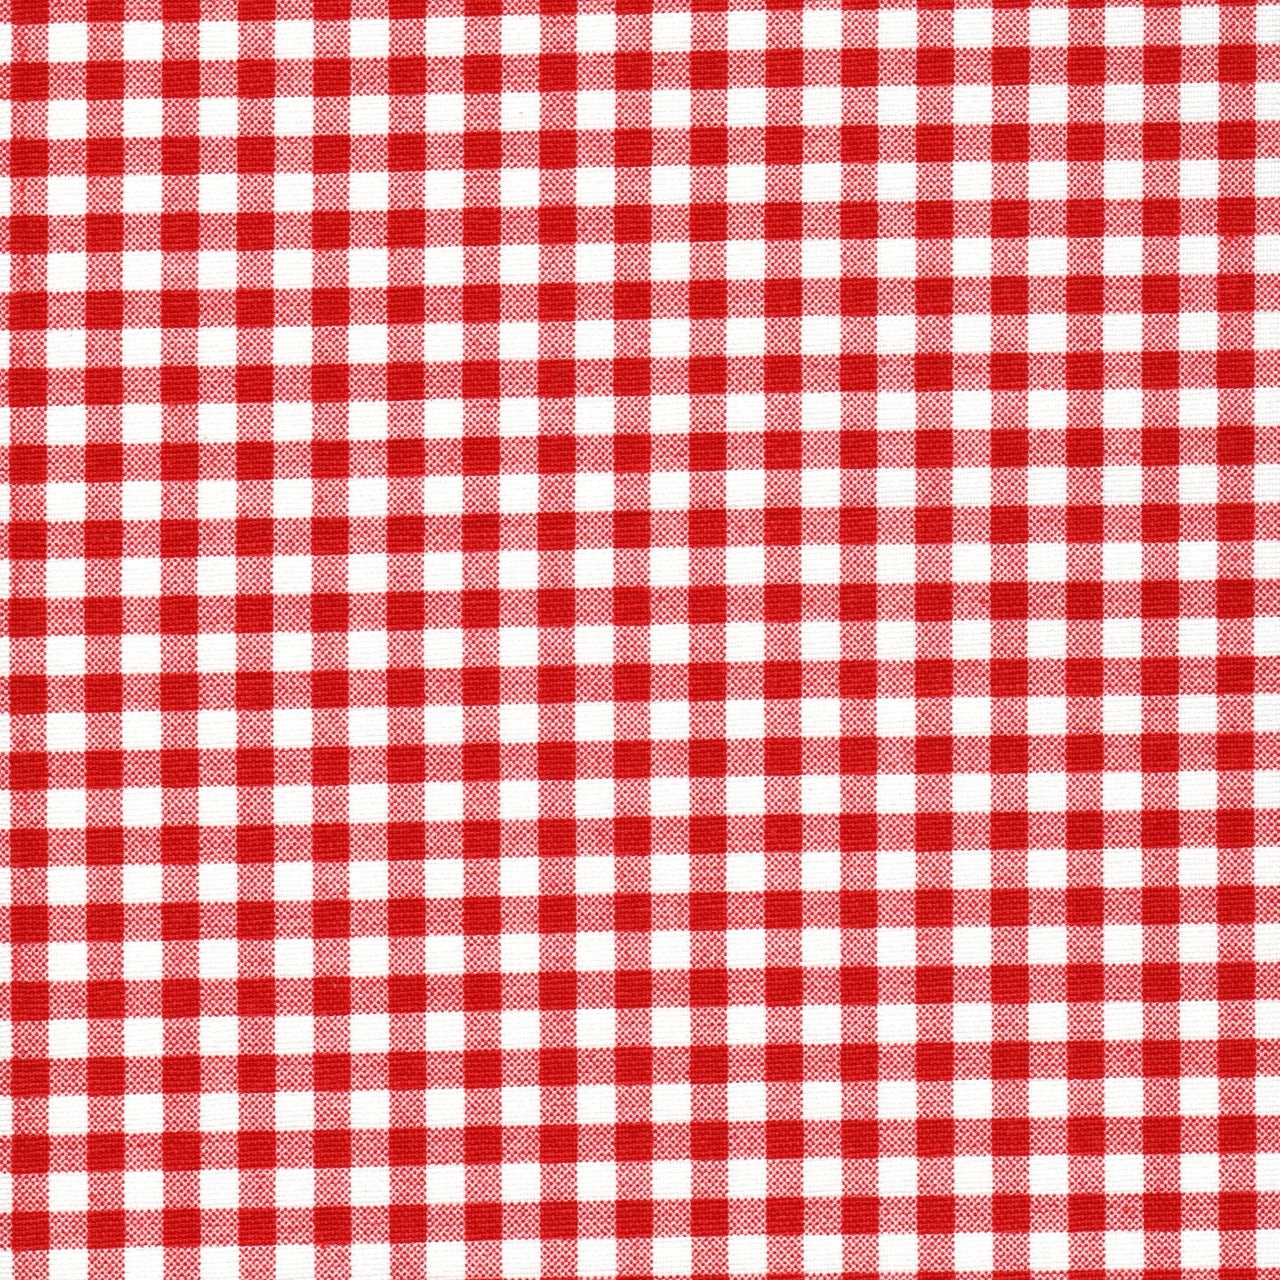 Tab Top Curtains in Lipstick Red Large Gingham Check on White